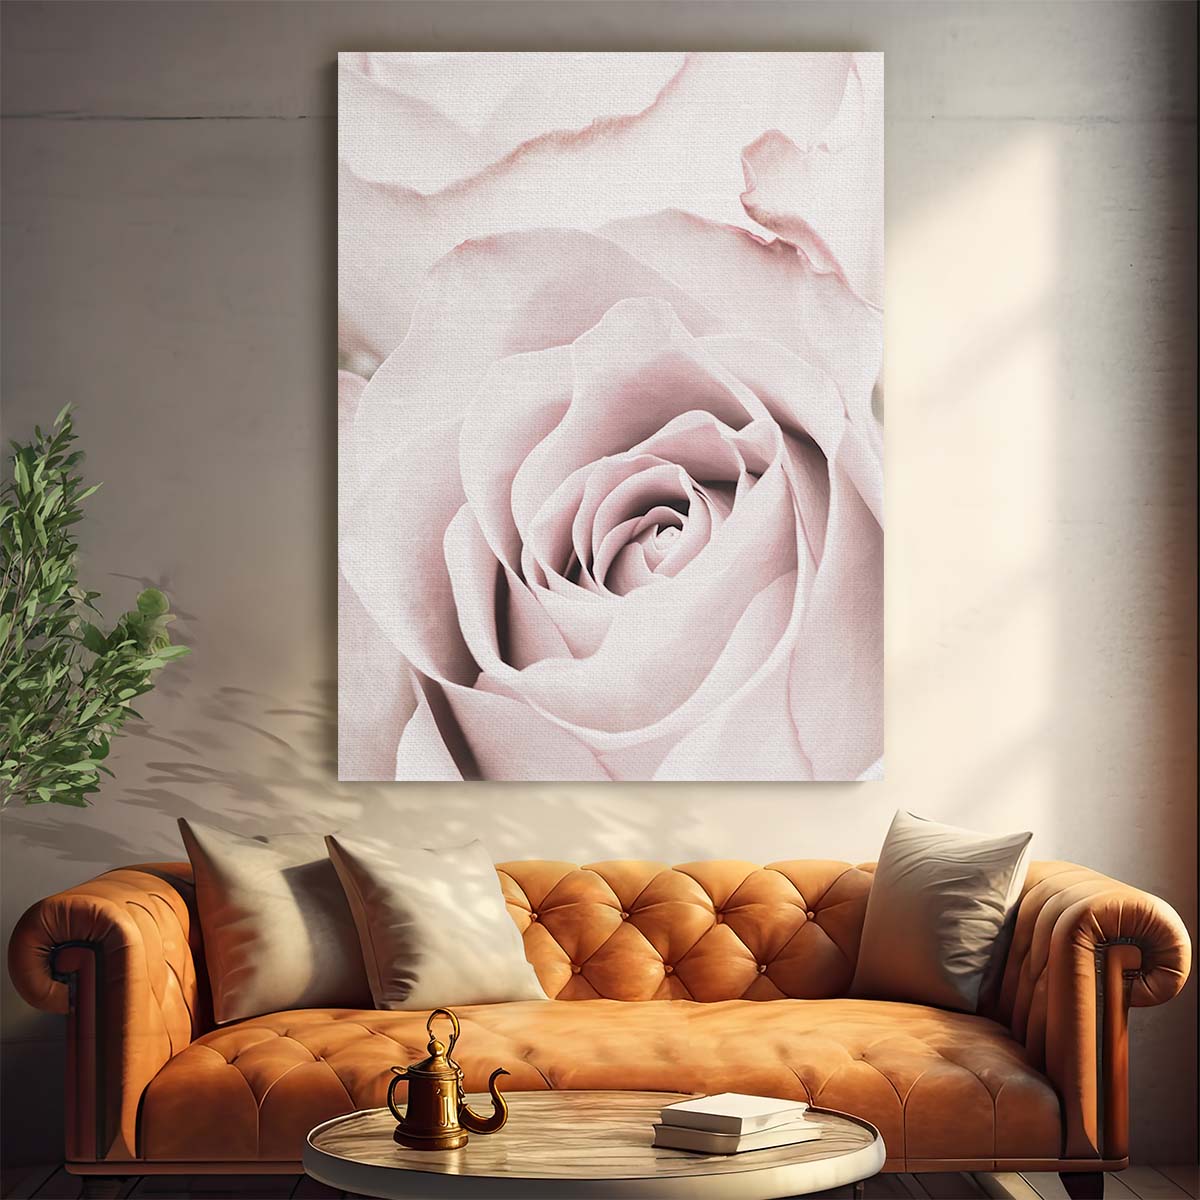 Romantic Pastel Pink Rose Macro Photography Wall Art by Luxuriance Designs, made in USA